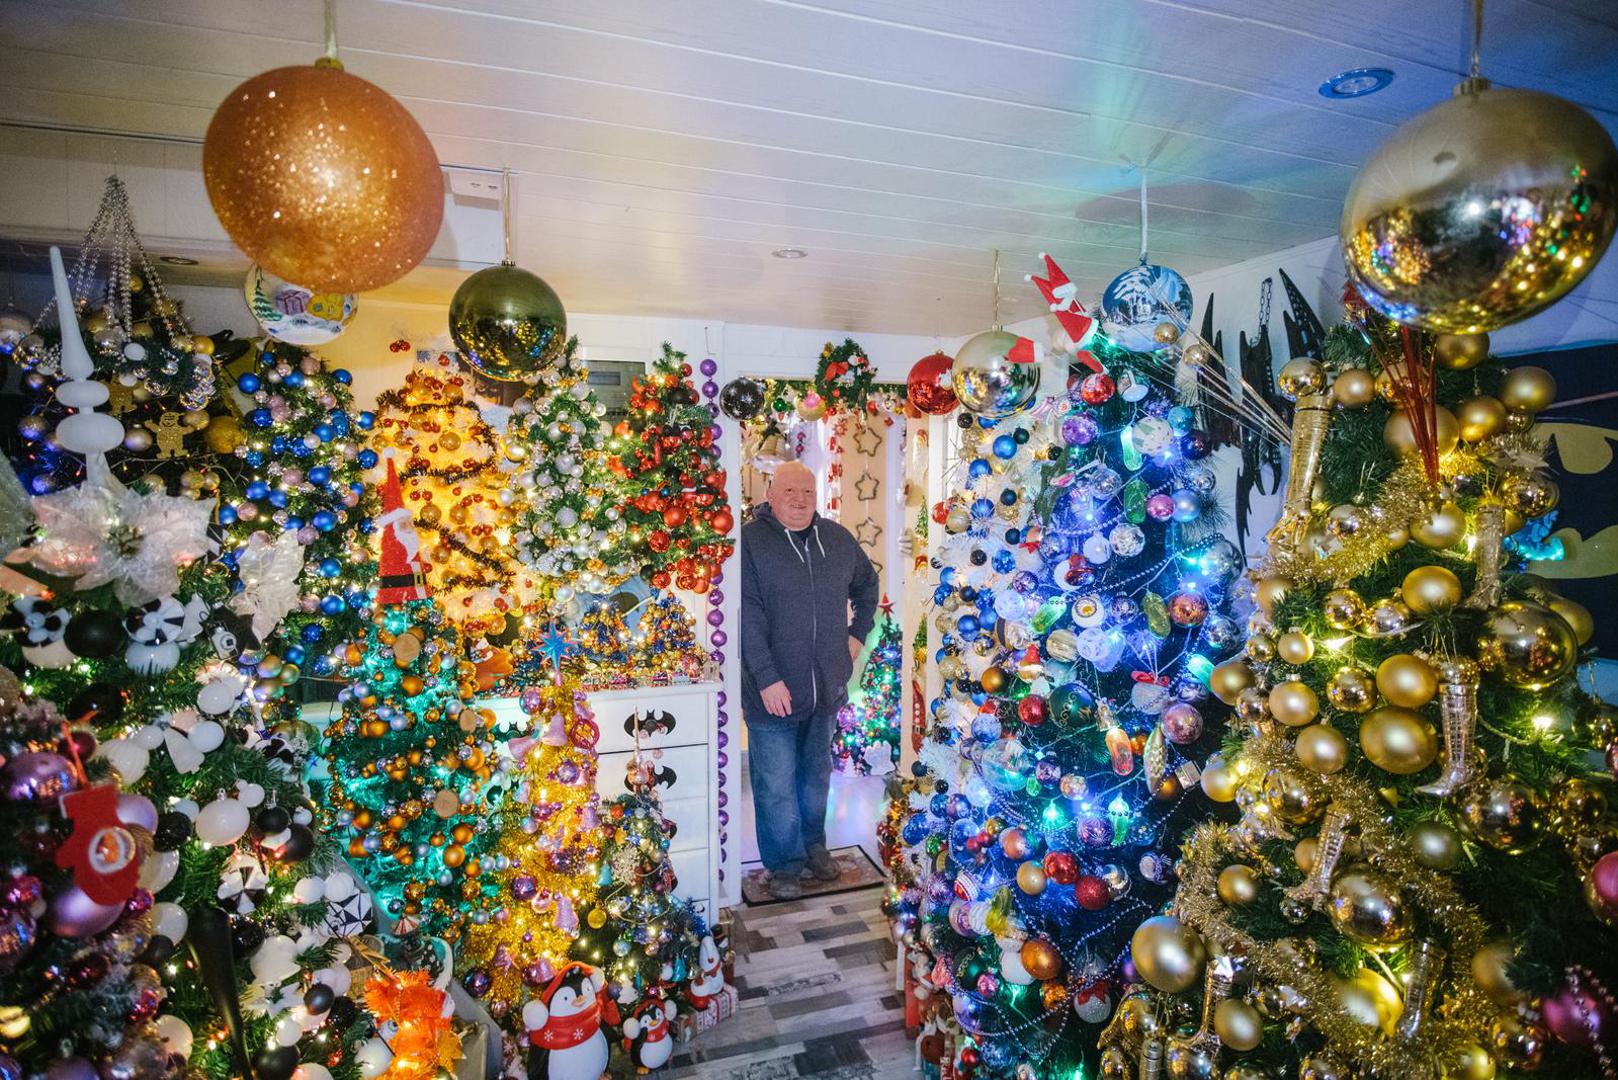 06 December 2021, Lower Saxony, Rinteln: Thomas Jeromin stands among Christmas trees in his house. Thomas Jeromin has set a new world record with 444 Christmas trees in his house. The record institute for Germany was there on Monday to check and confirmed the record. Photo: Ole Spata/dpa